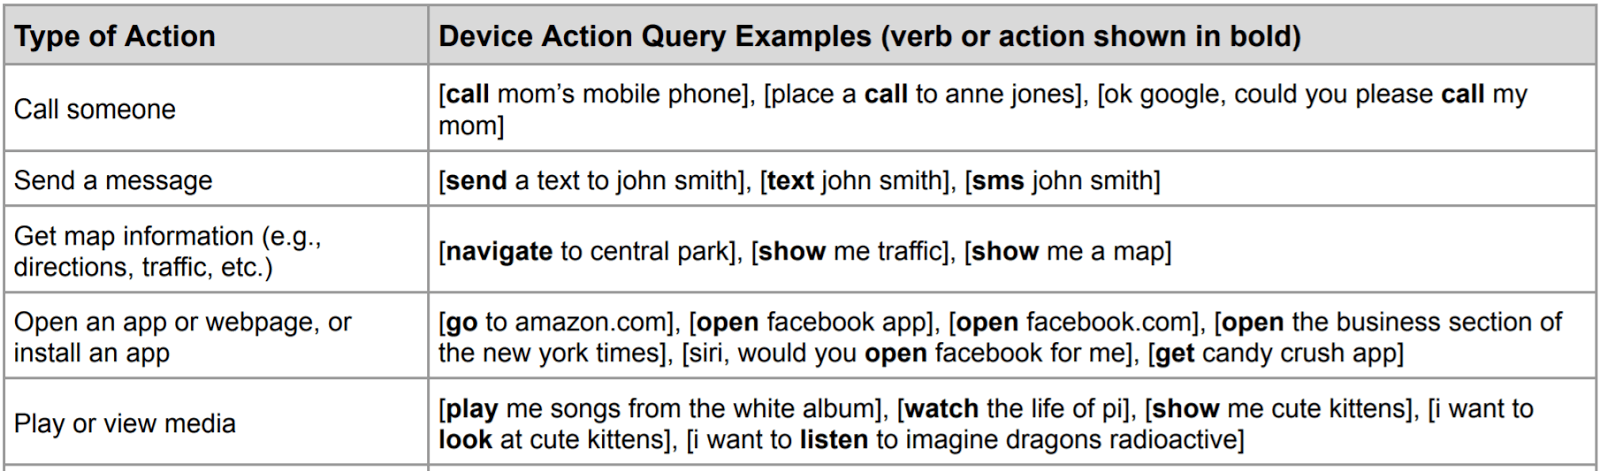 Devices examples. Active devices